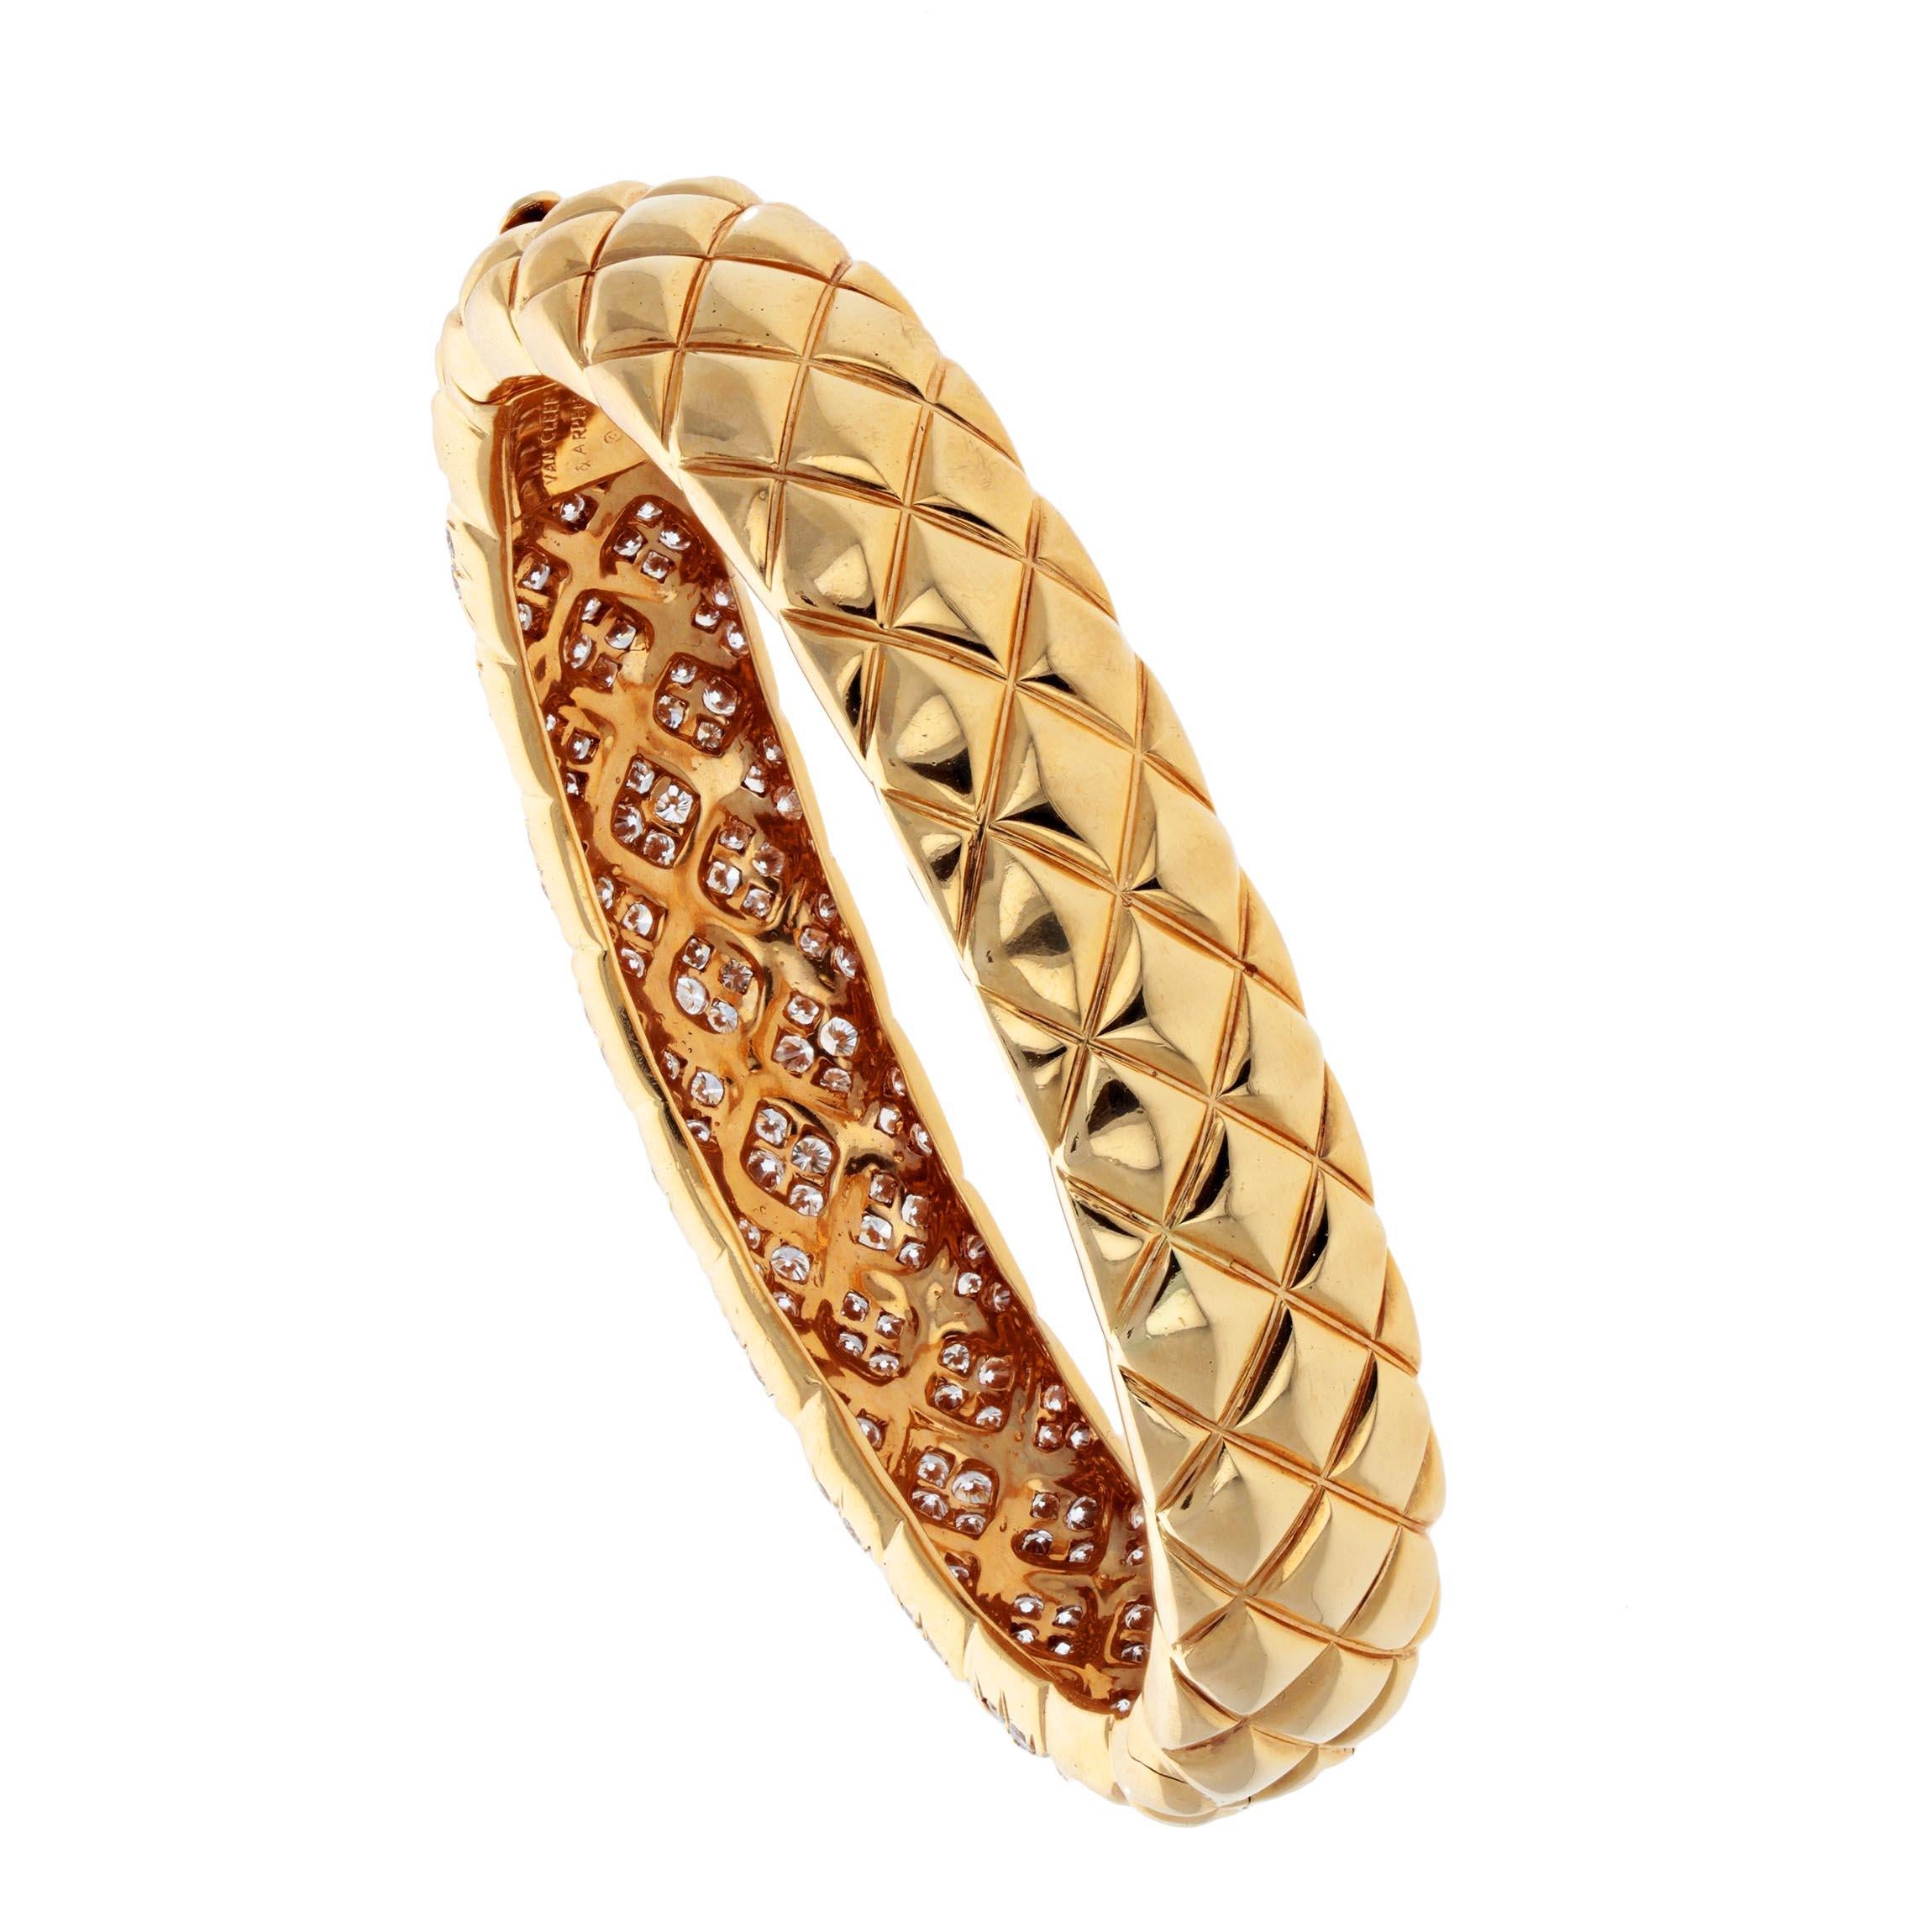 An easy-wearing bangle, cross-hatched to a cushion texture with the front half set with 178 round brilliant-cut diamonds in the Alhambra motif, at an estimated 4.8 carats, mounted in 18k yellow gold. Signed Van Cleef & Arpels with number M33955, 